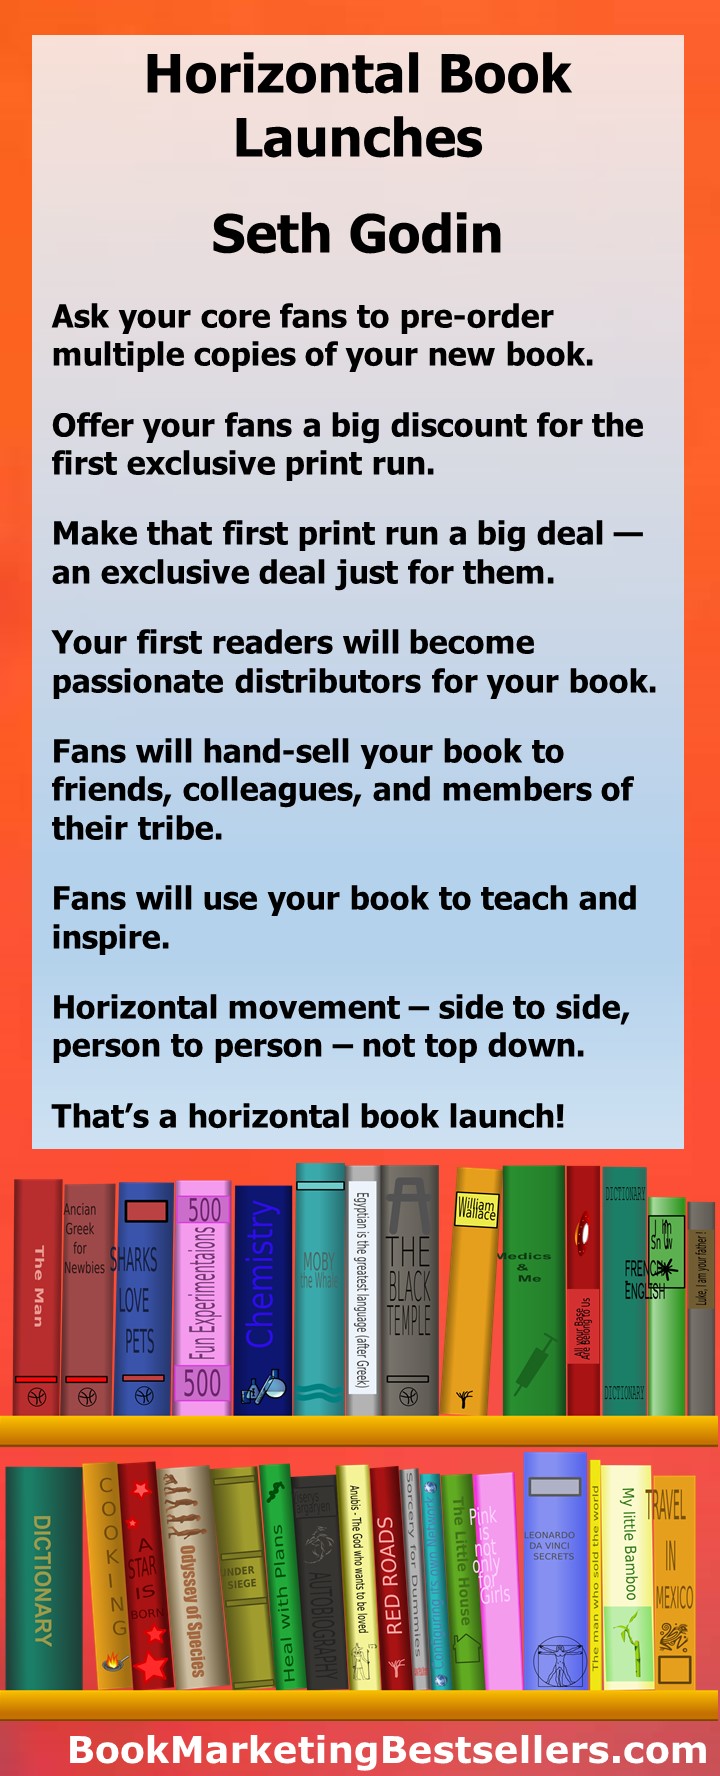 Horizontal Book Launches: Fans who will hand-sell the book to colleagues and friends. Individuals who will use them to teach or inspire, to get everyone on the same page. Horizontal movement, side to side, person to person, not top down. That's a horizontal book launch.